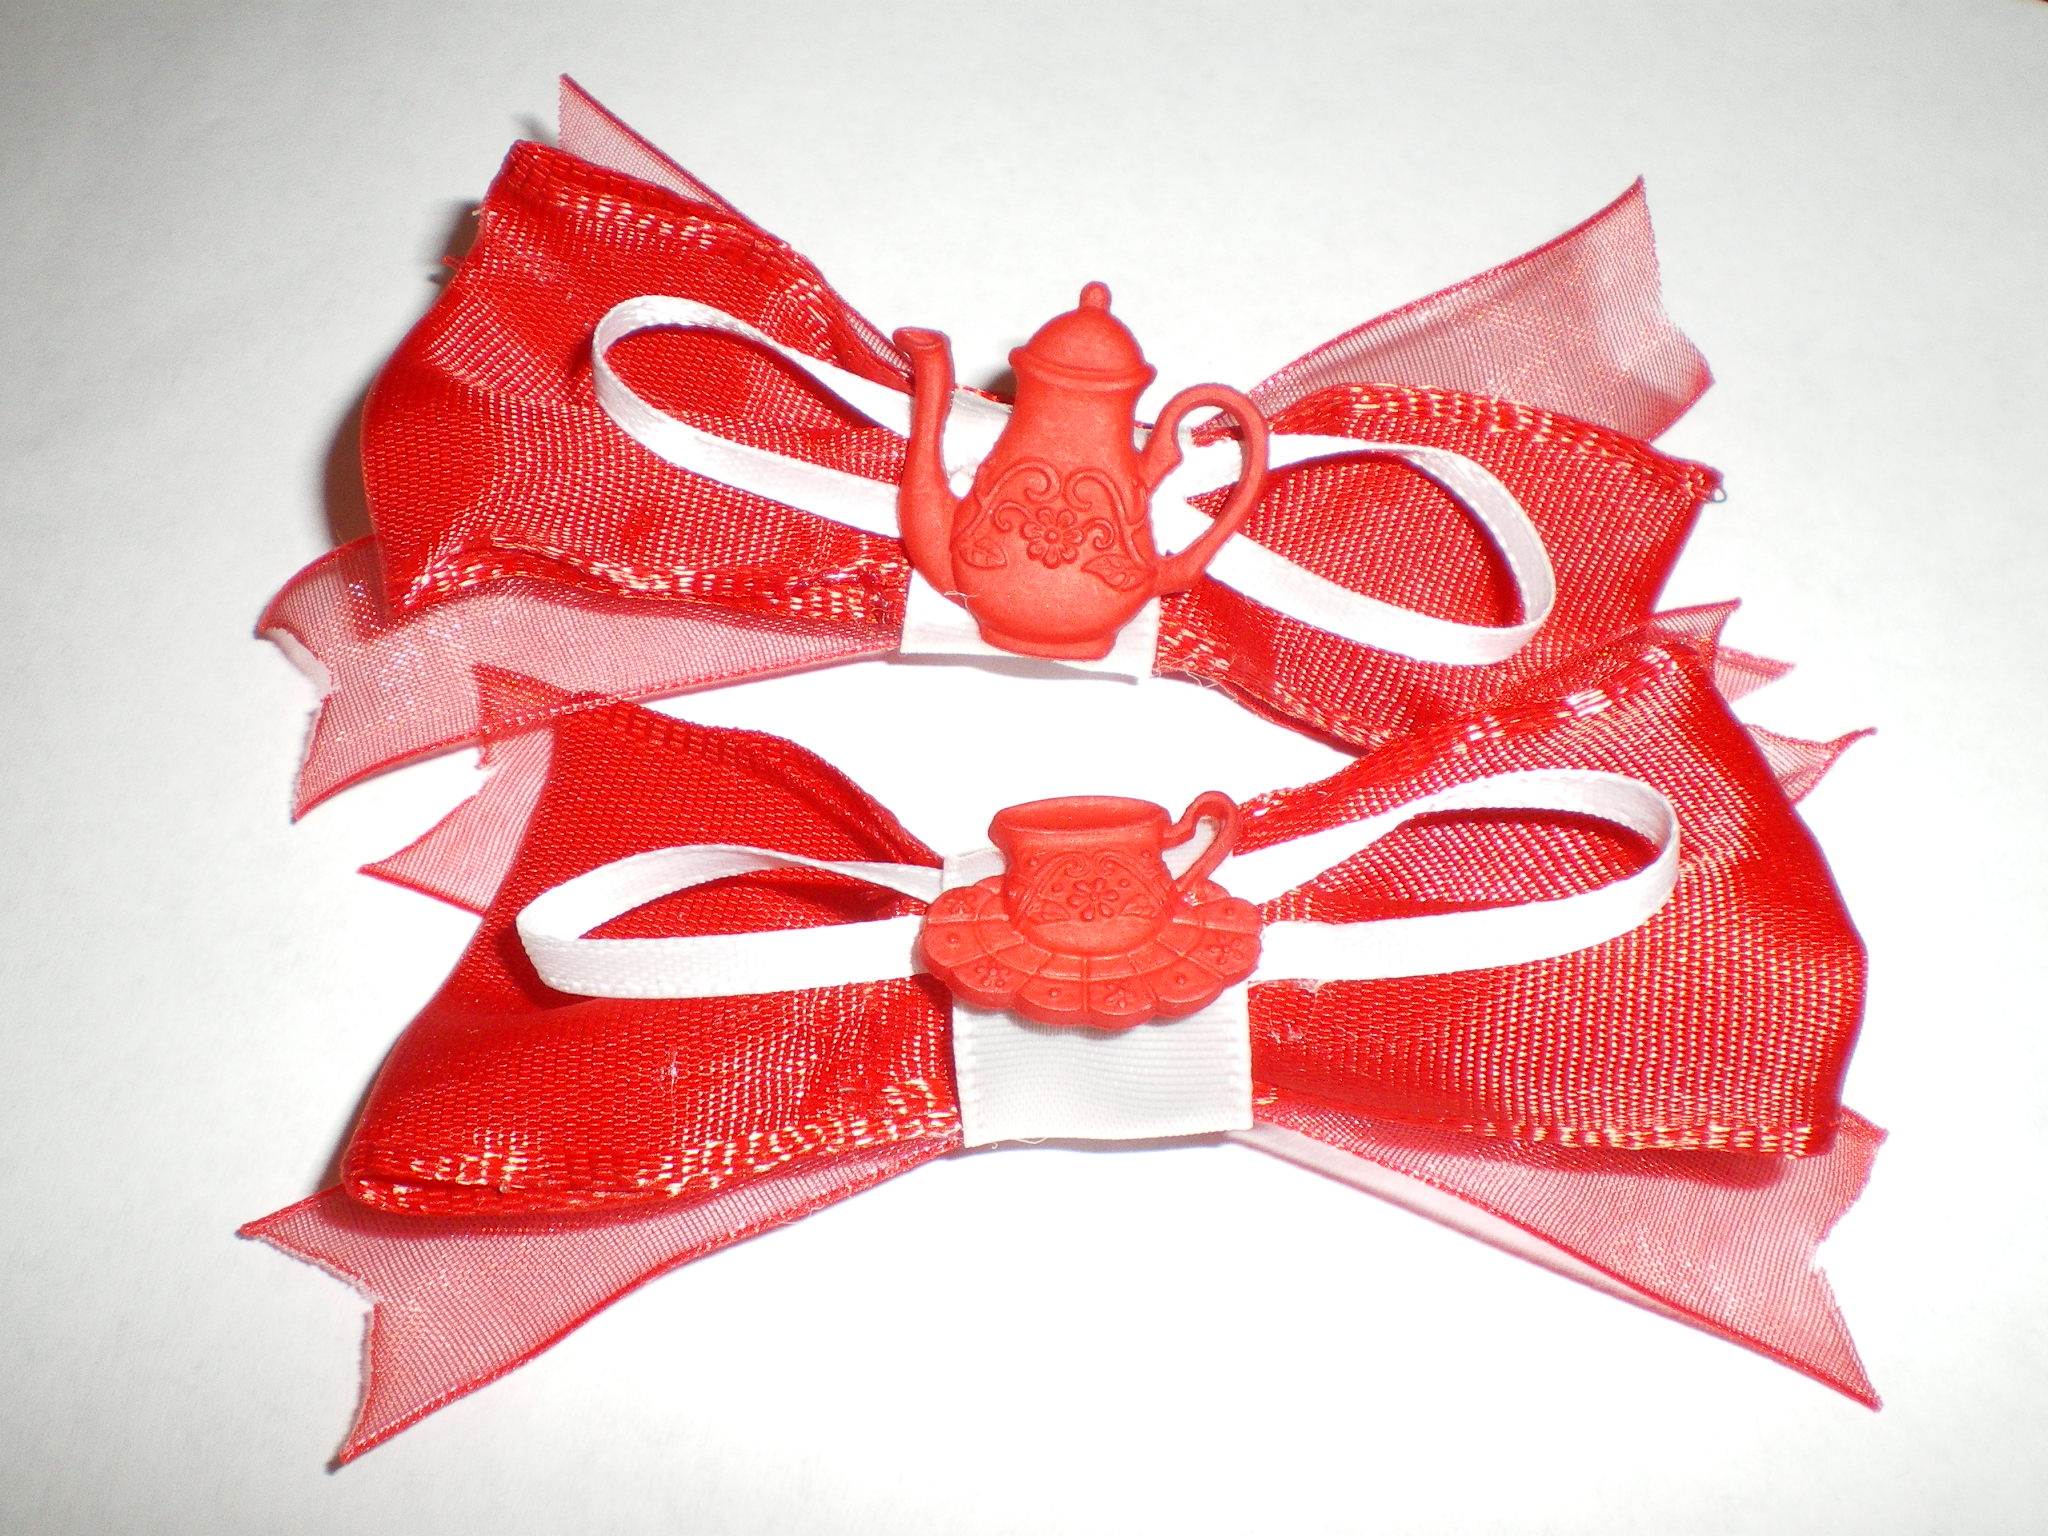 Red and White "Tea Party" Bows